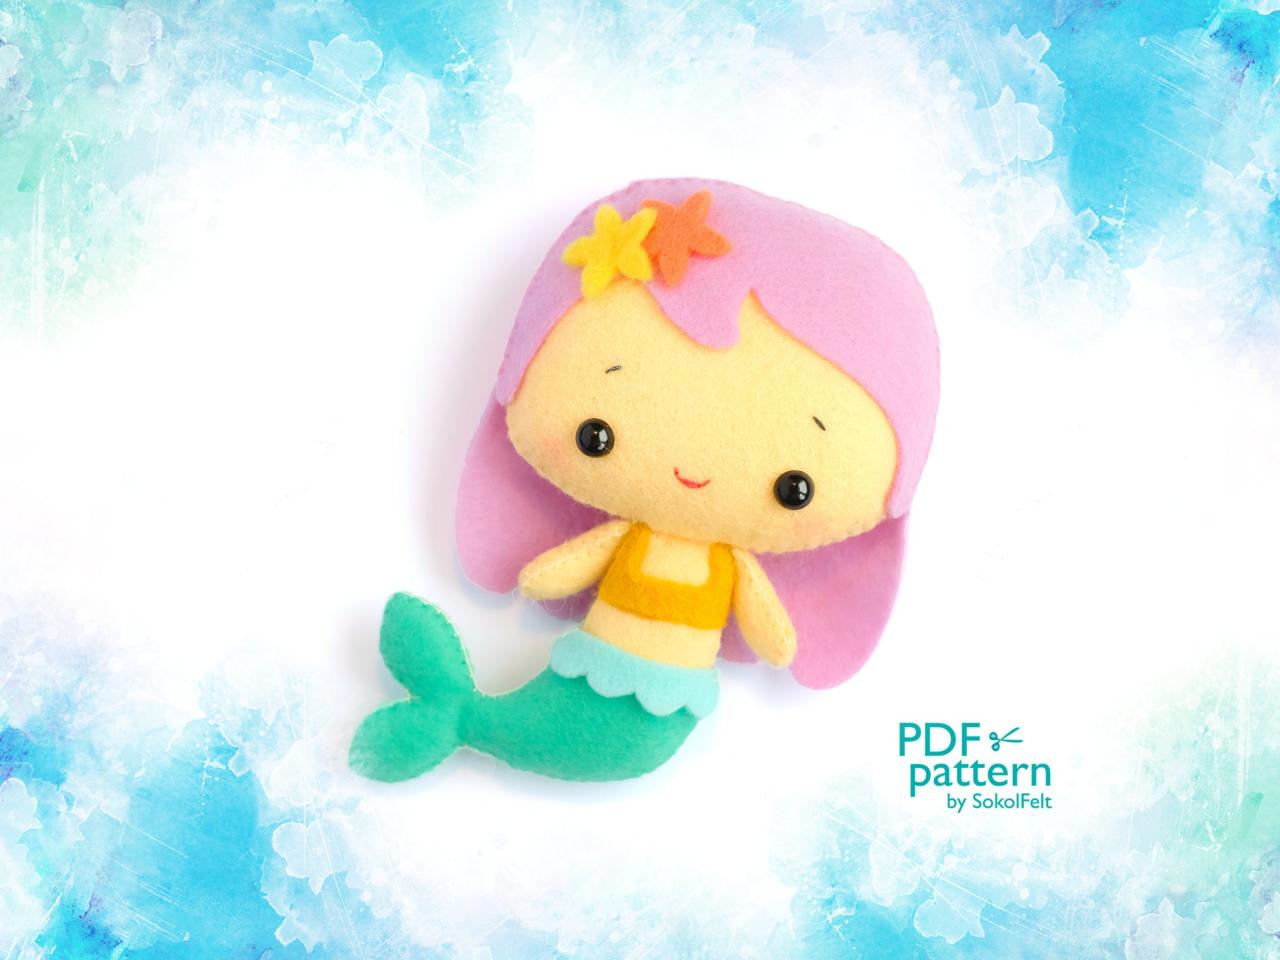 Cute Mermaid toy sewing PDF and SVG Patterns, Felt Sea creature sewing tutorial, Sea Life baby crib mobile toy